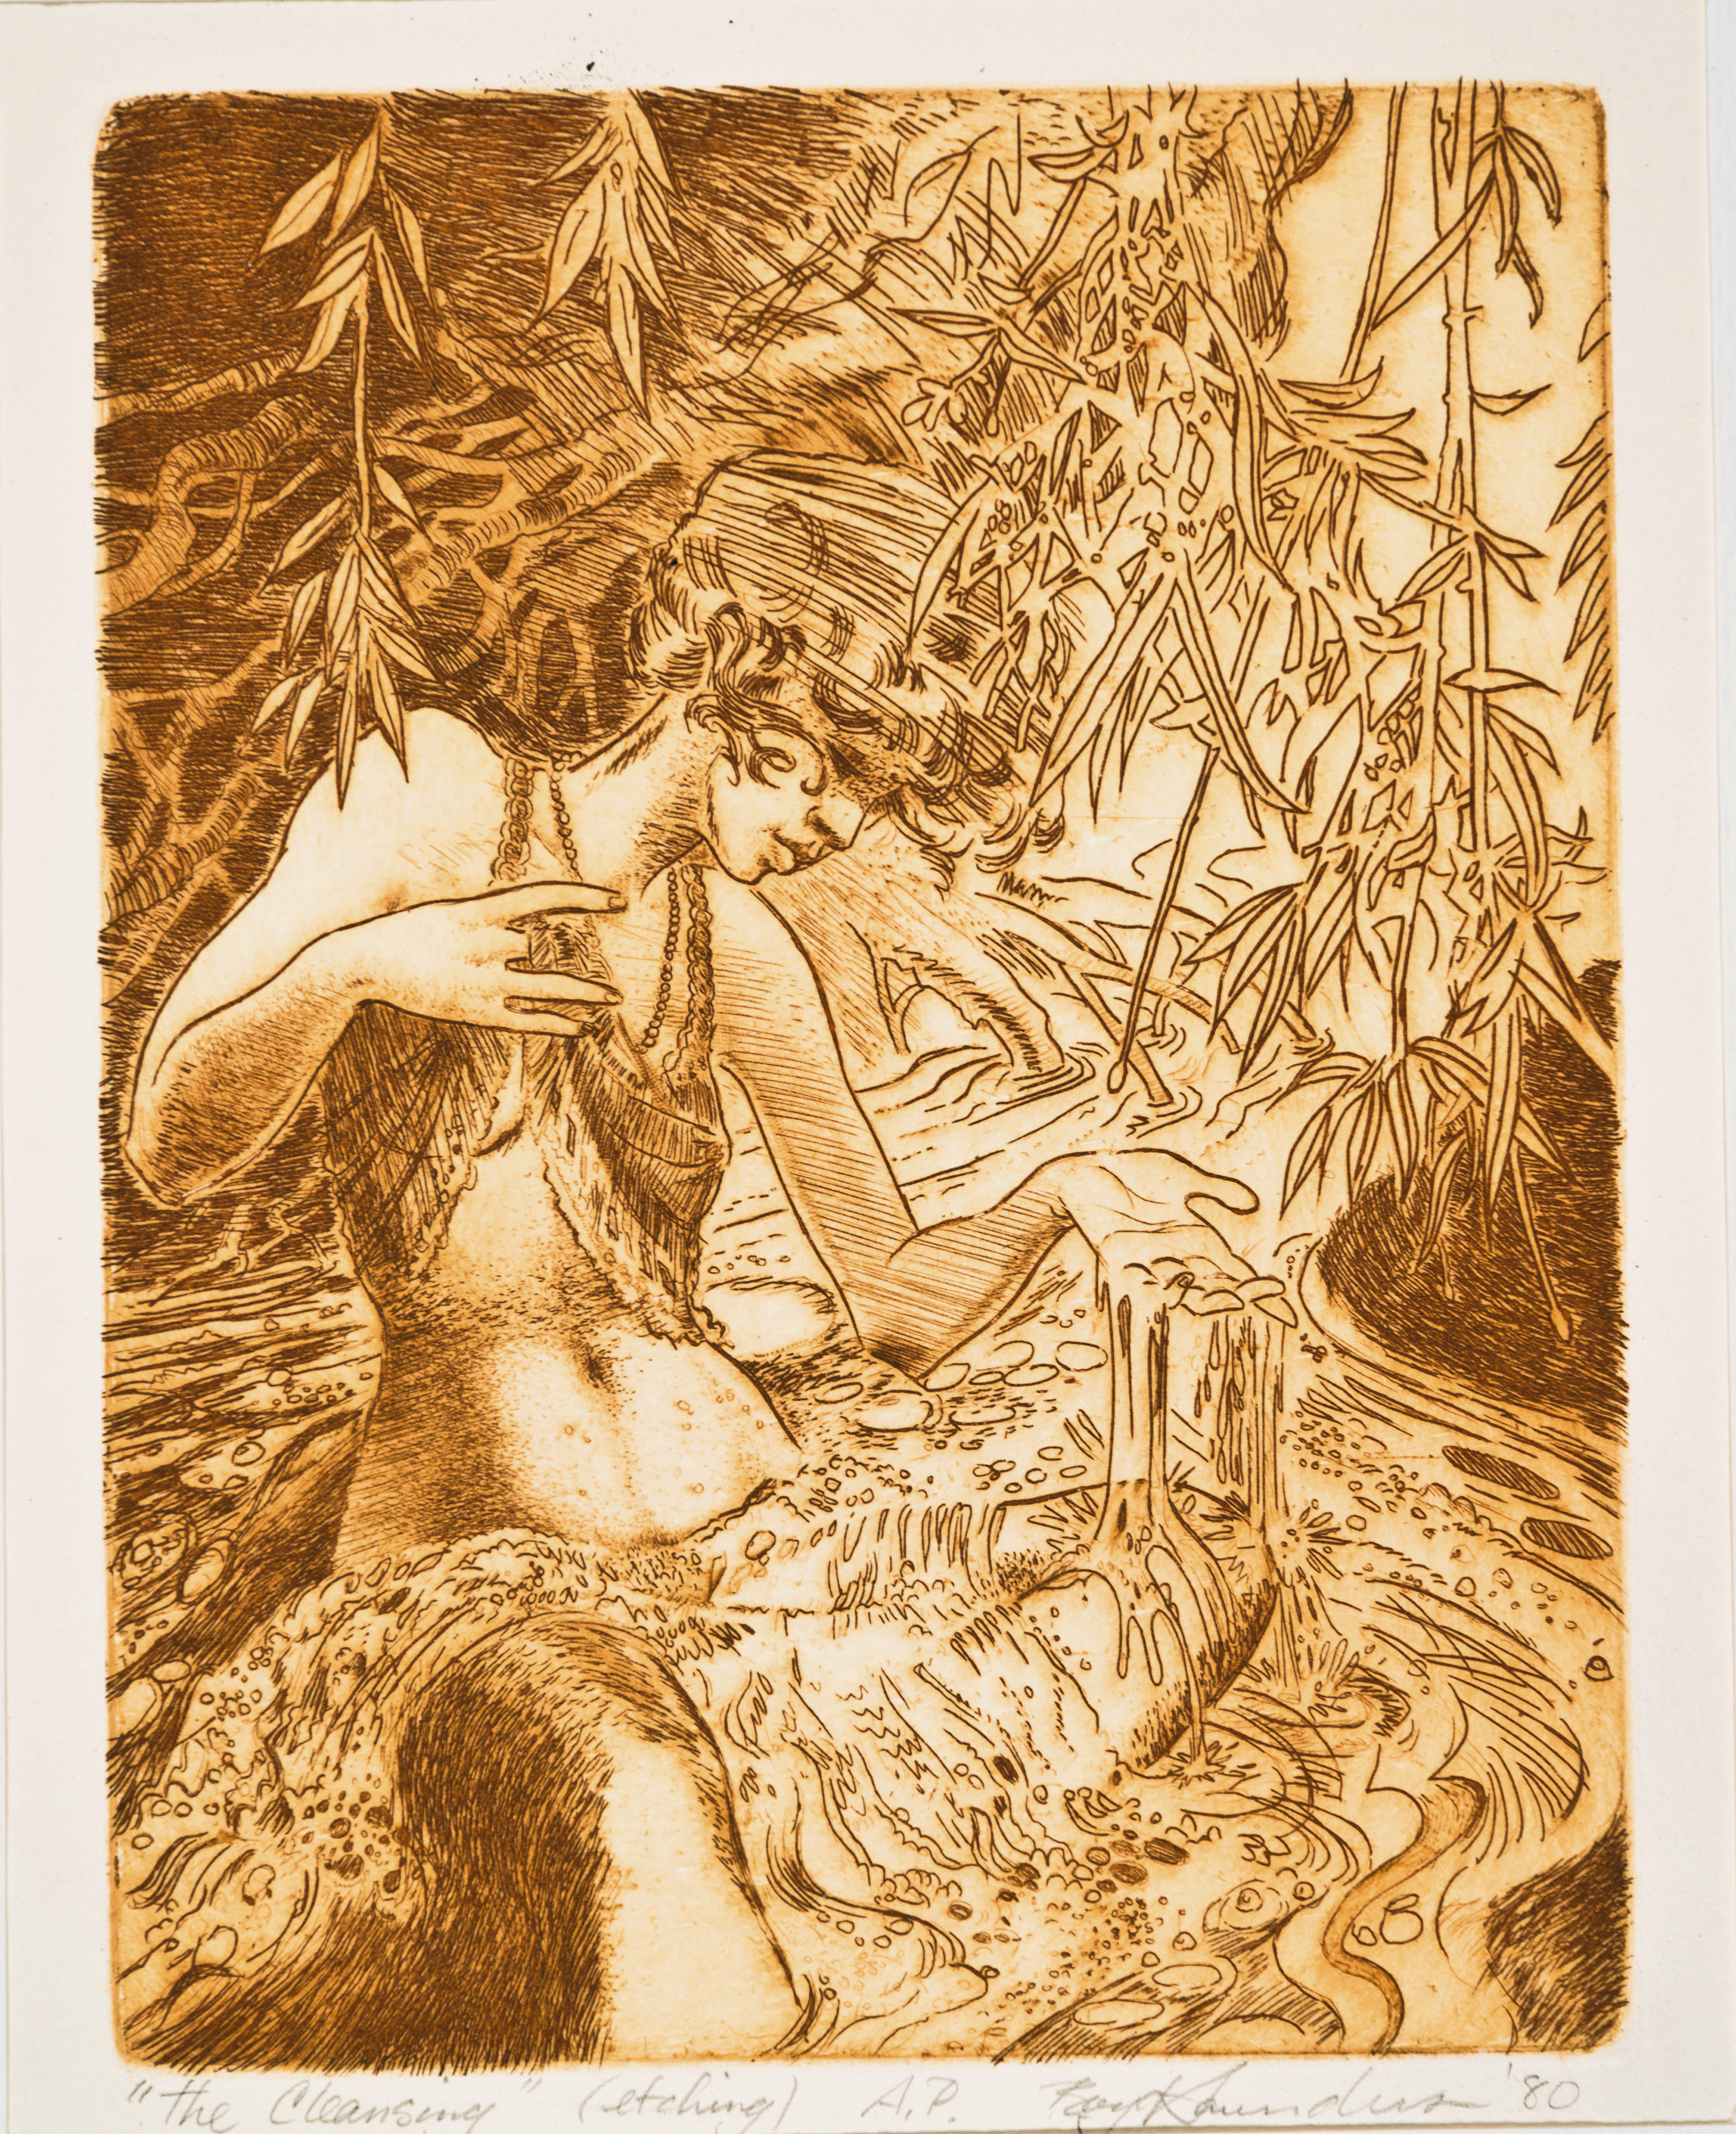 The Cleansing, etching, 7 × 5 1/2 inches. From 2002 – 2004, Boyd created eight black and white etchings to capture the main characters and story of The Sound and the Fury by William Faulkner. Here, Caddy Compton sits in the stream she once played in as a child to undergo a ritualistic cleansing following her numerous affairs. 
Used with permission from A View from the South: The Narrative Art of Boyd Saunders by Thomas Dewey II and published by the University of South Carolina Press © 2019, University of South Carolina, Columbia.